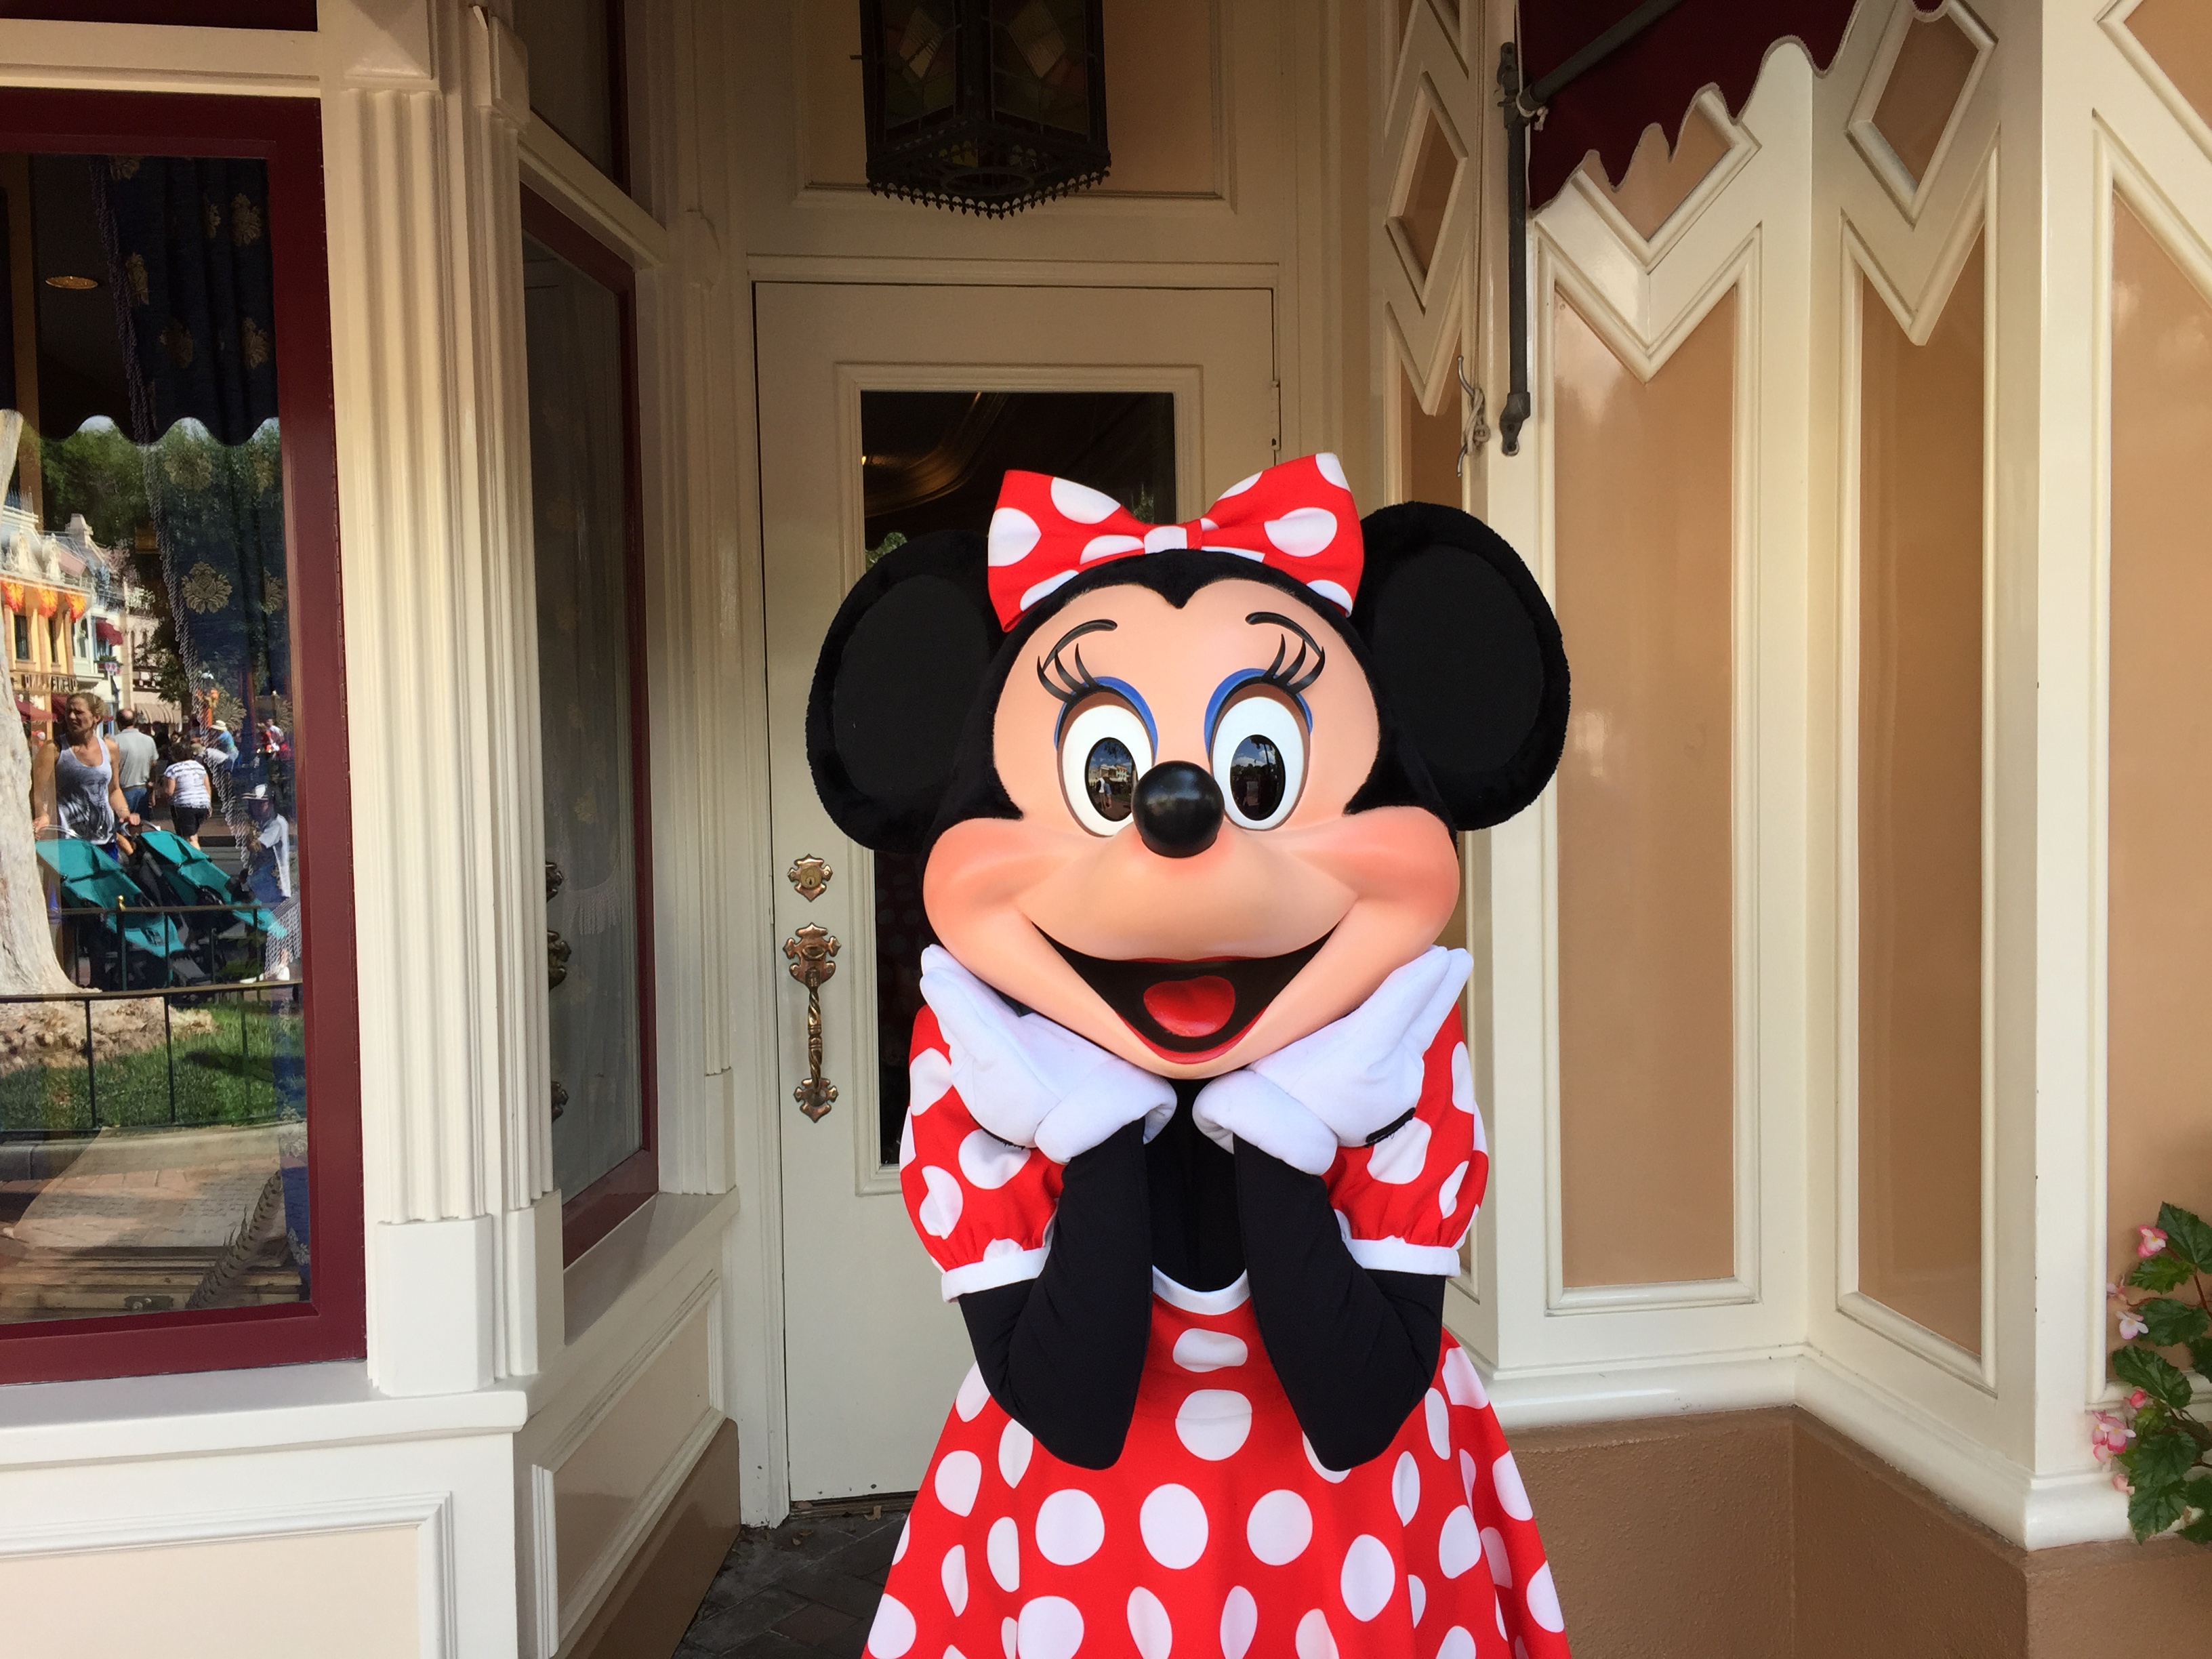 Dining Review of Character Breakfast with Minnie and Friends at the Plaza Inn at Disneyland